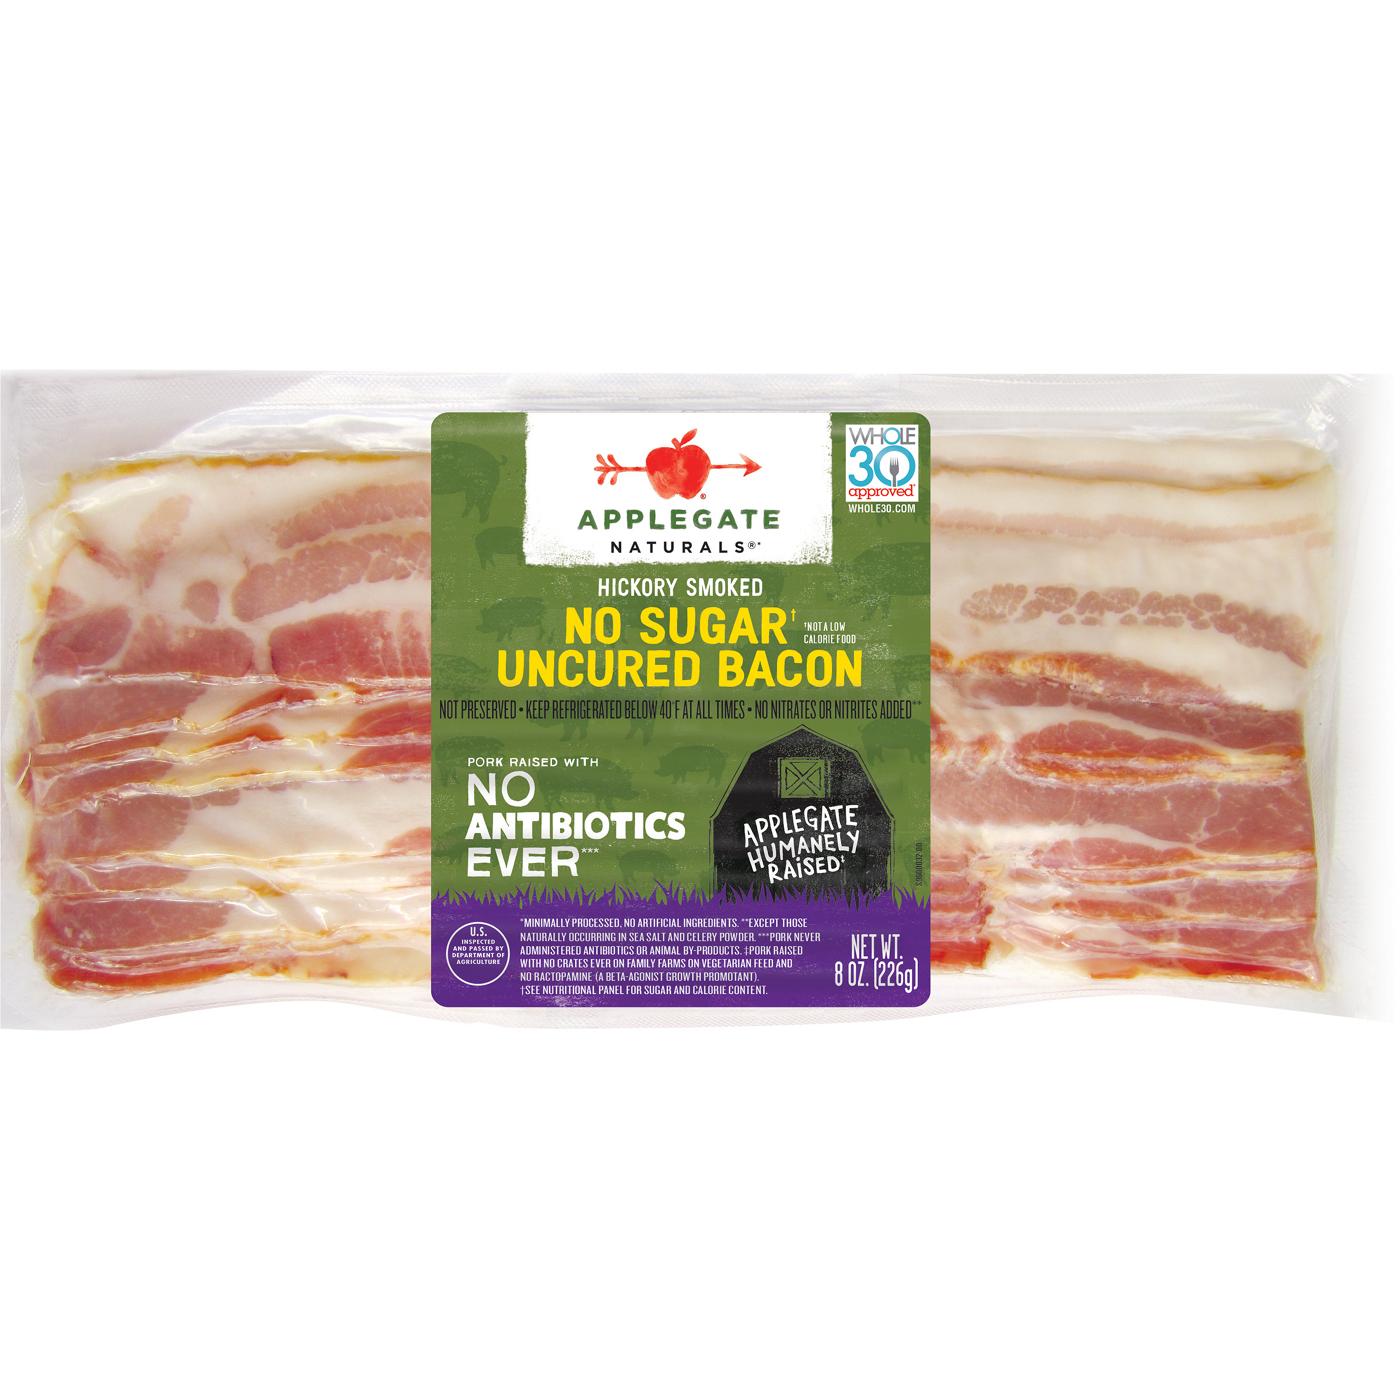 Applegate Naturals Hickory Smoked No Sugar Uncured Bacon ; image 1 of 3